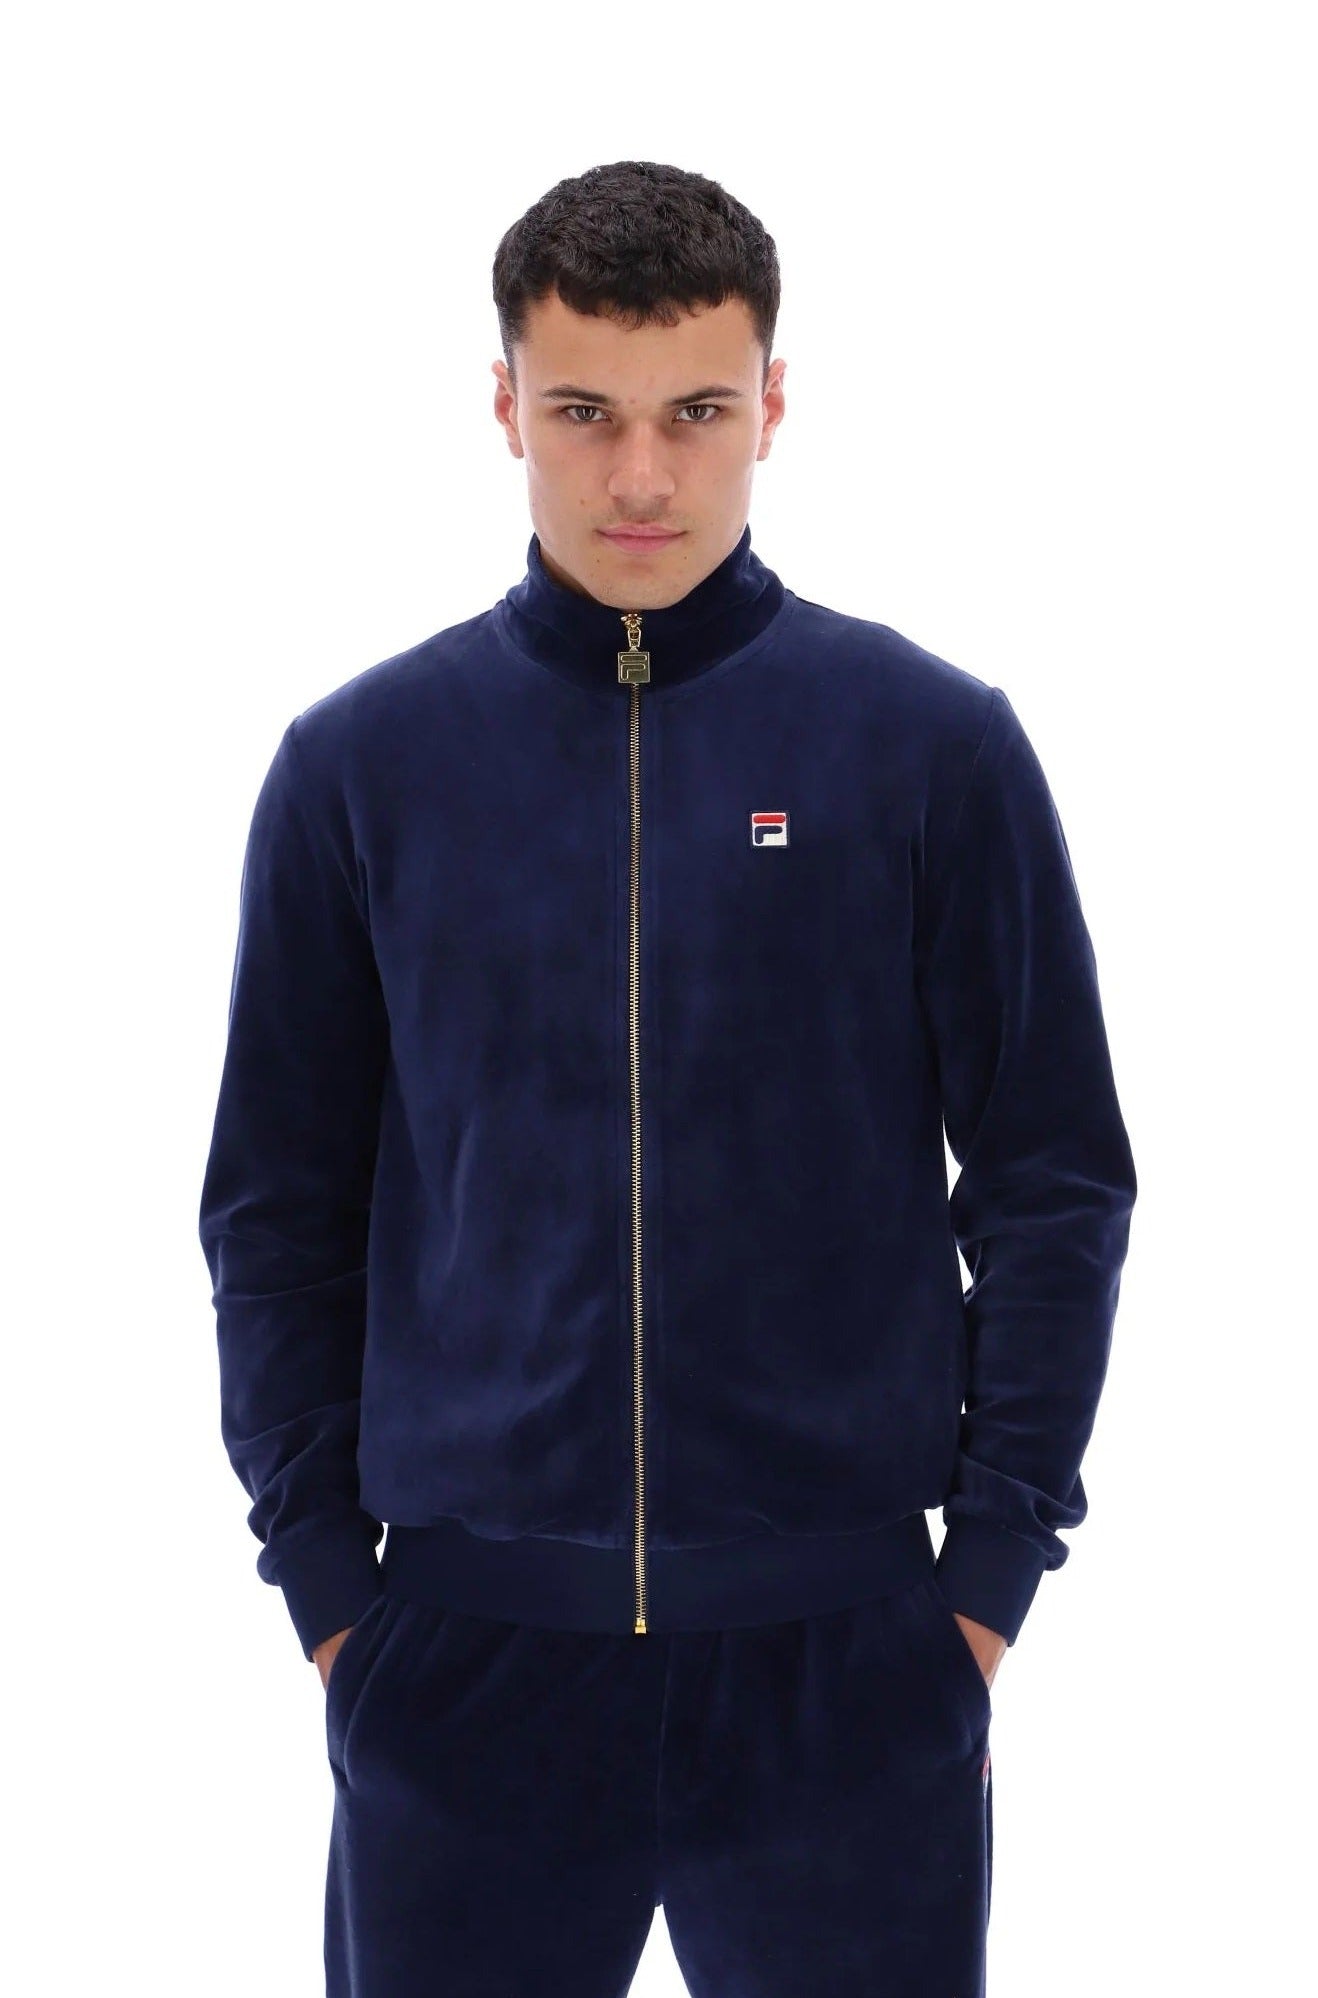 Fila Marc Velour Track Jacket with Gold Trims in Fila Navy - FW231MH033-410 #dr.kruger #dr kruger #dr kruger